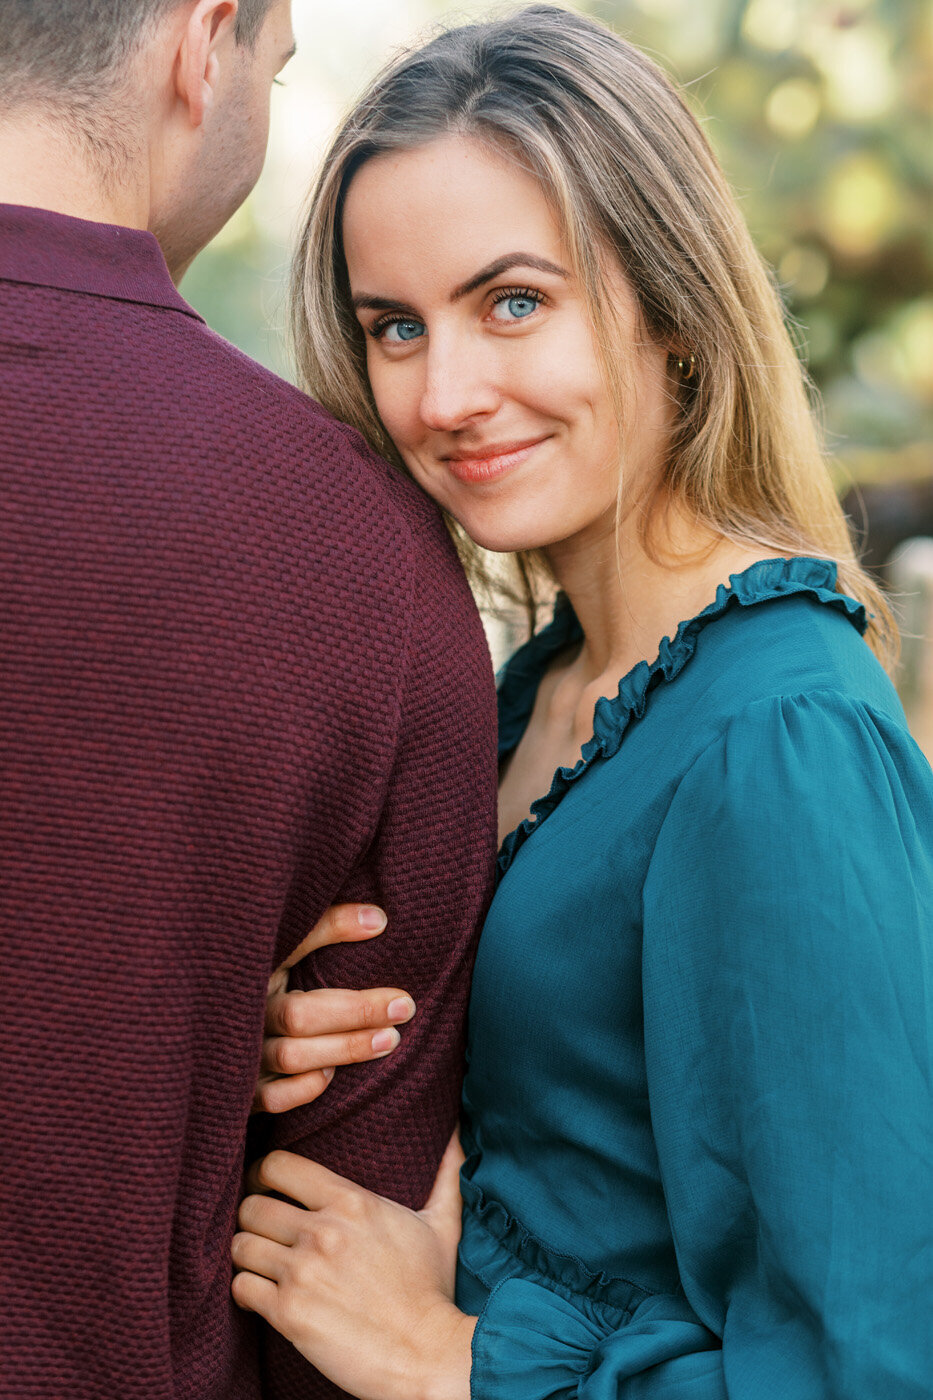 Cactus Engagement Session - Bethany Brown 21